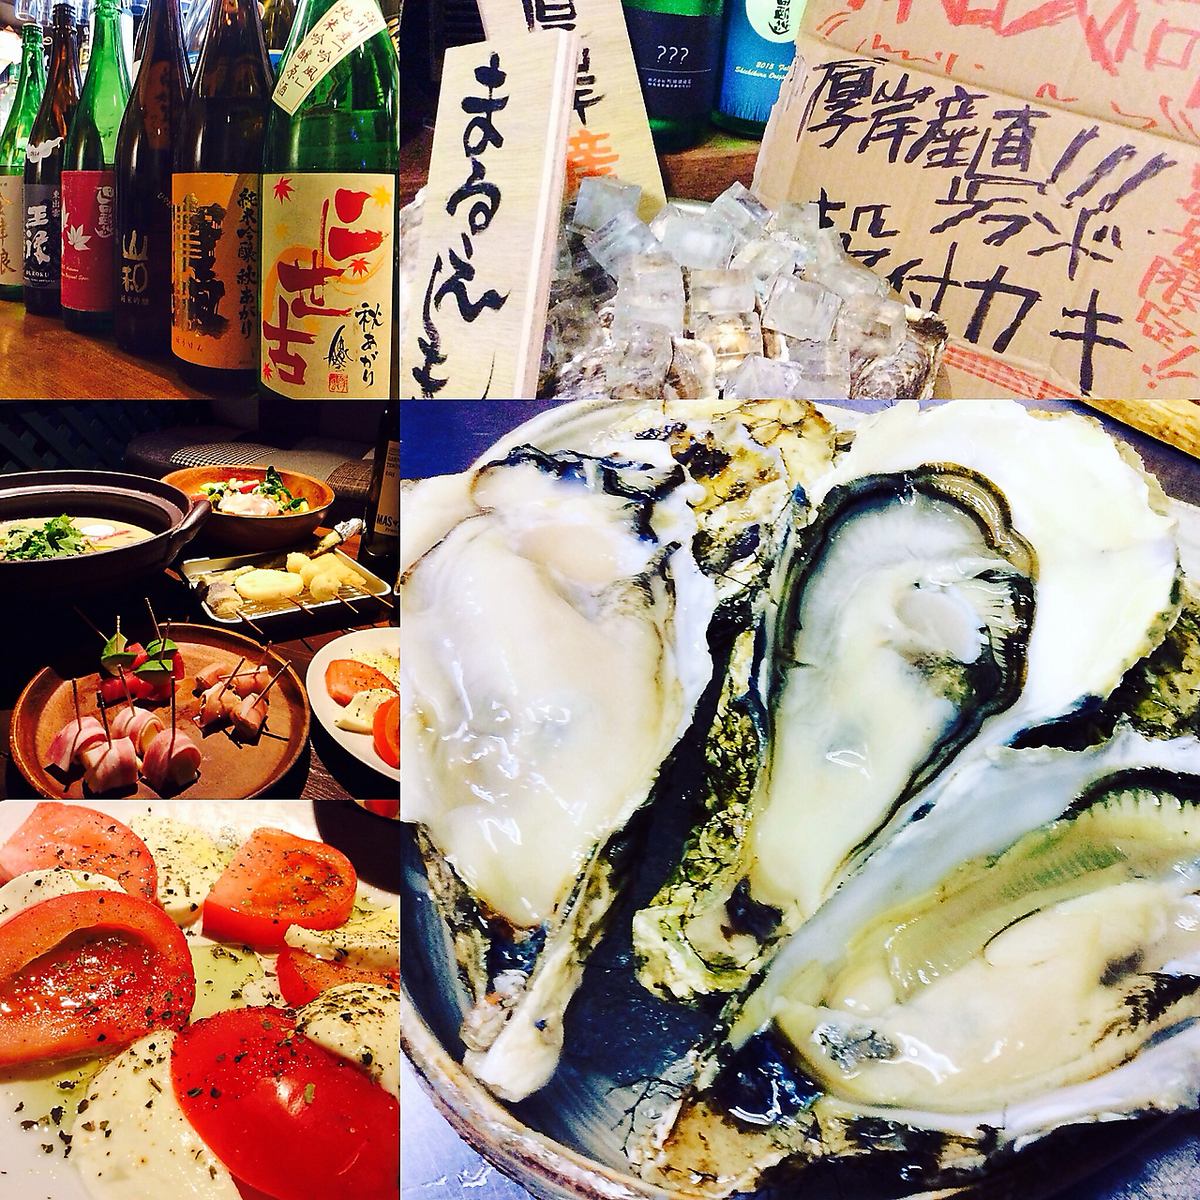 There are also many single female regular customers.All-you-can-drink including local sake starts from 1 person ◎